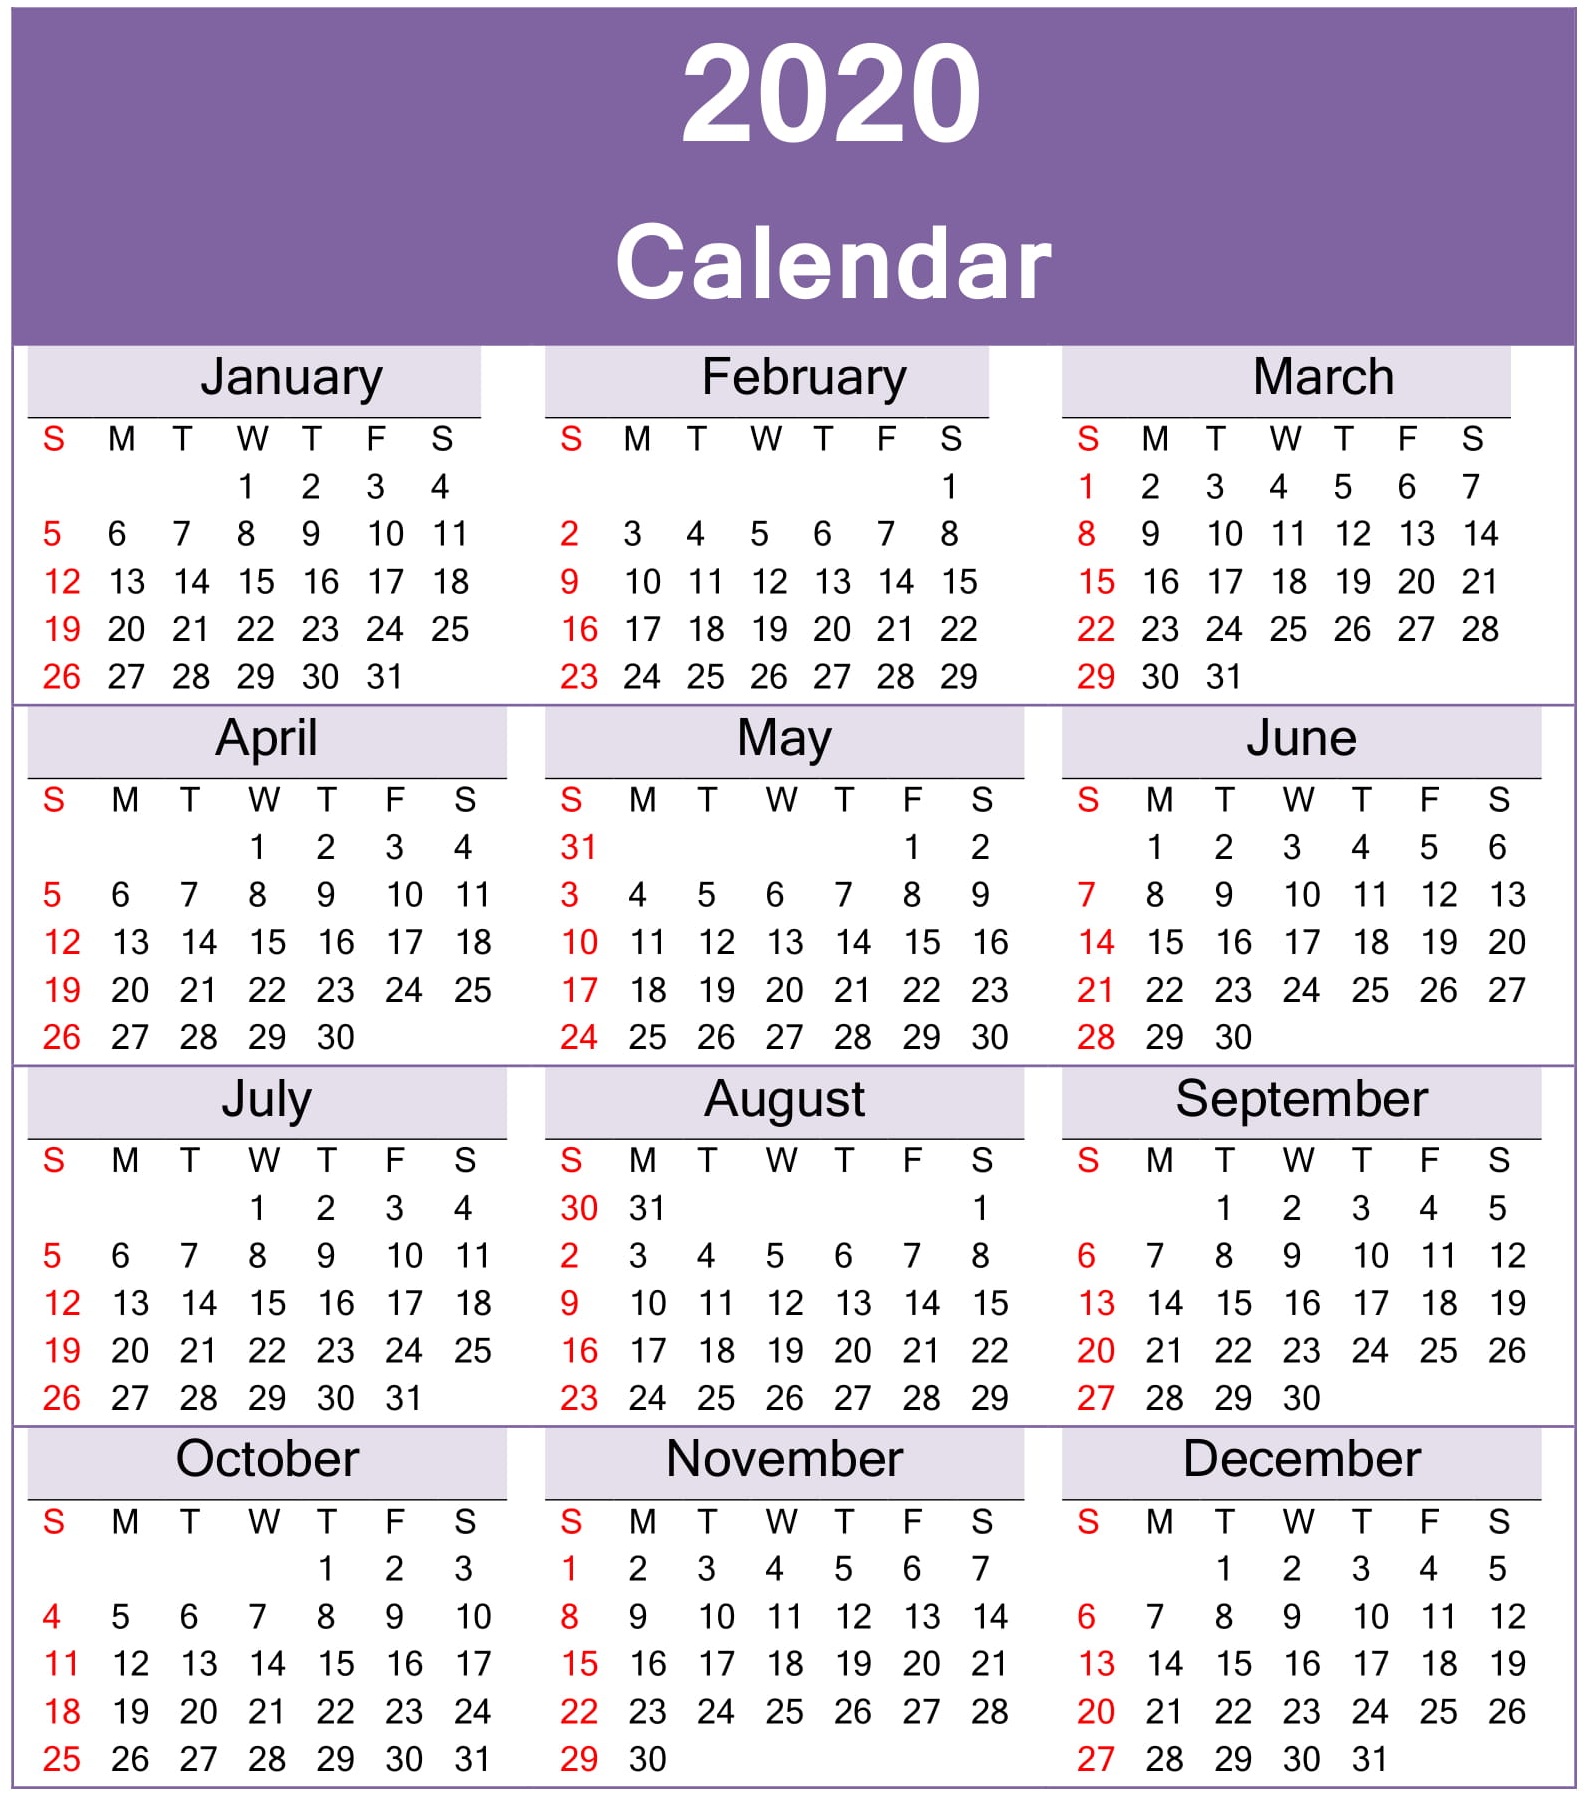 How Many Days In 2020 Calendar Year